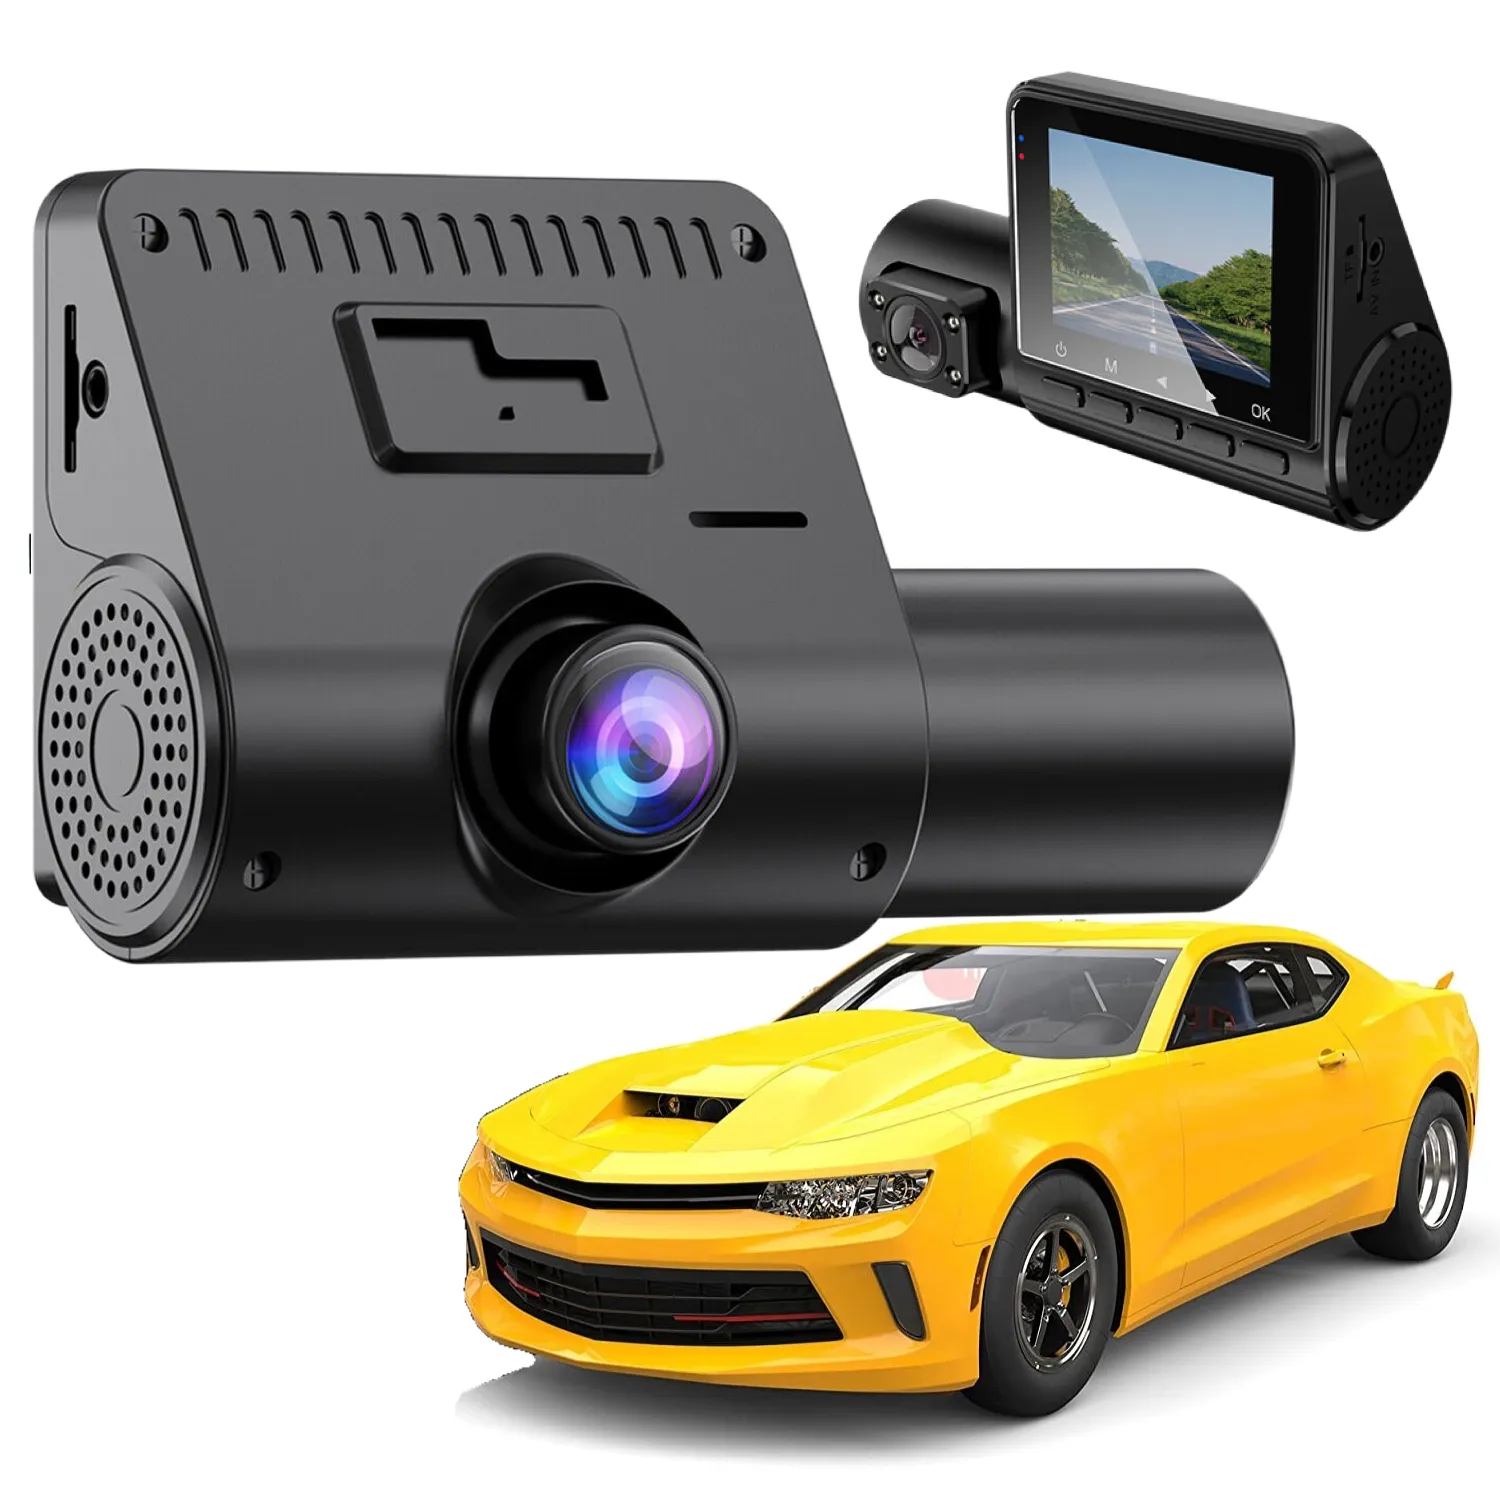 2.4 Inch IPS Screen Car Black Box 3 Cameras Video Recorder For Car Corolla Dash Cam front and inside mirror reversing camera